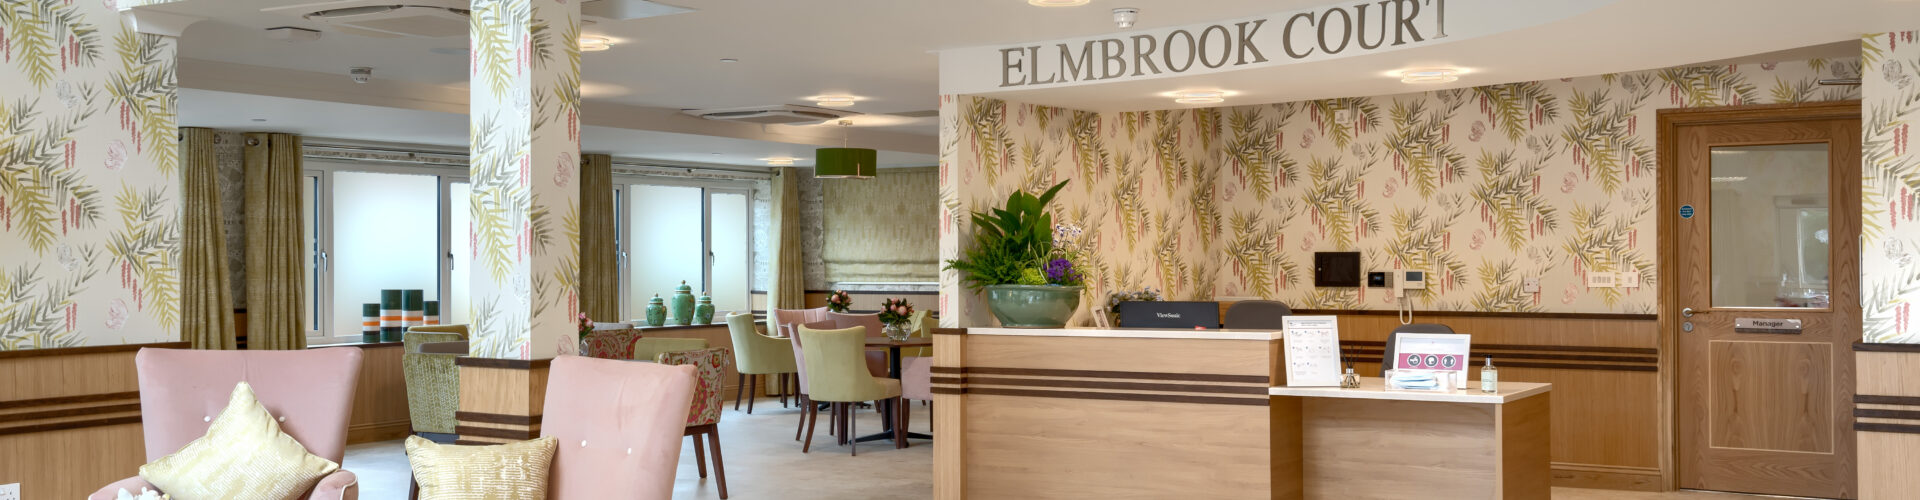 Reception area at Elmbrook Court Care Home in Wantage